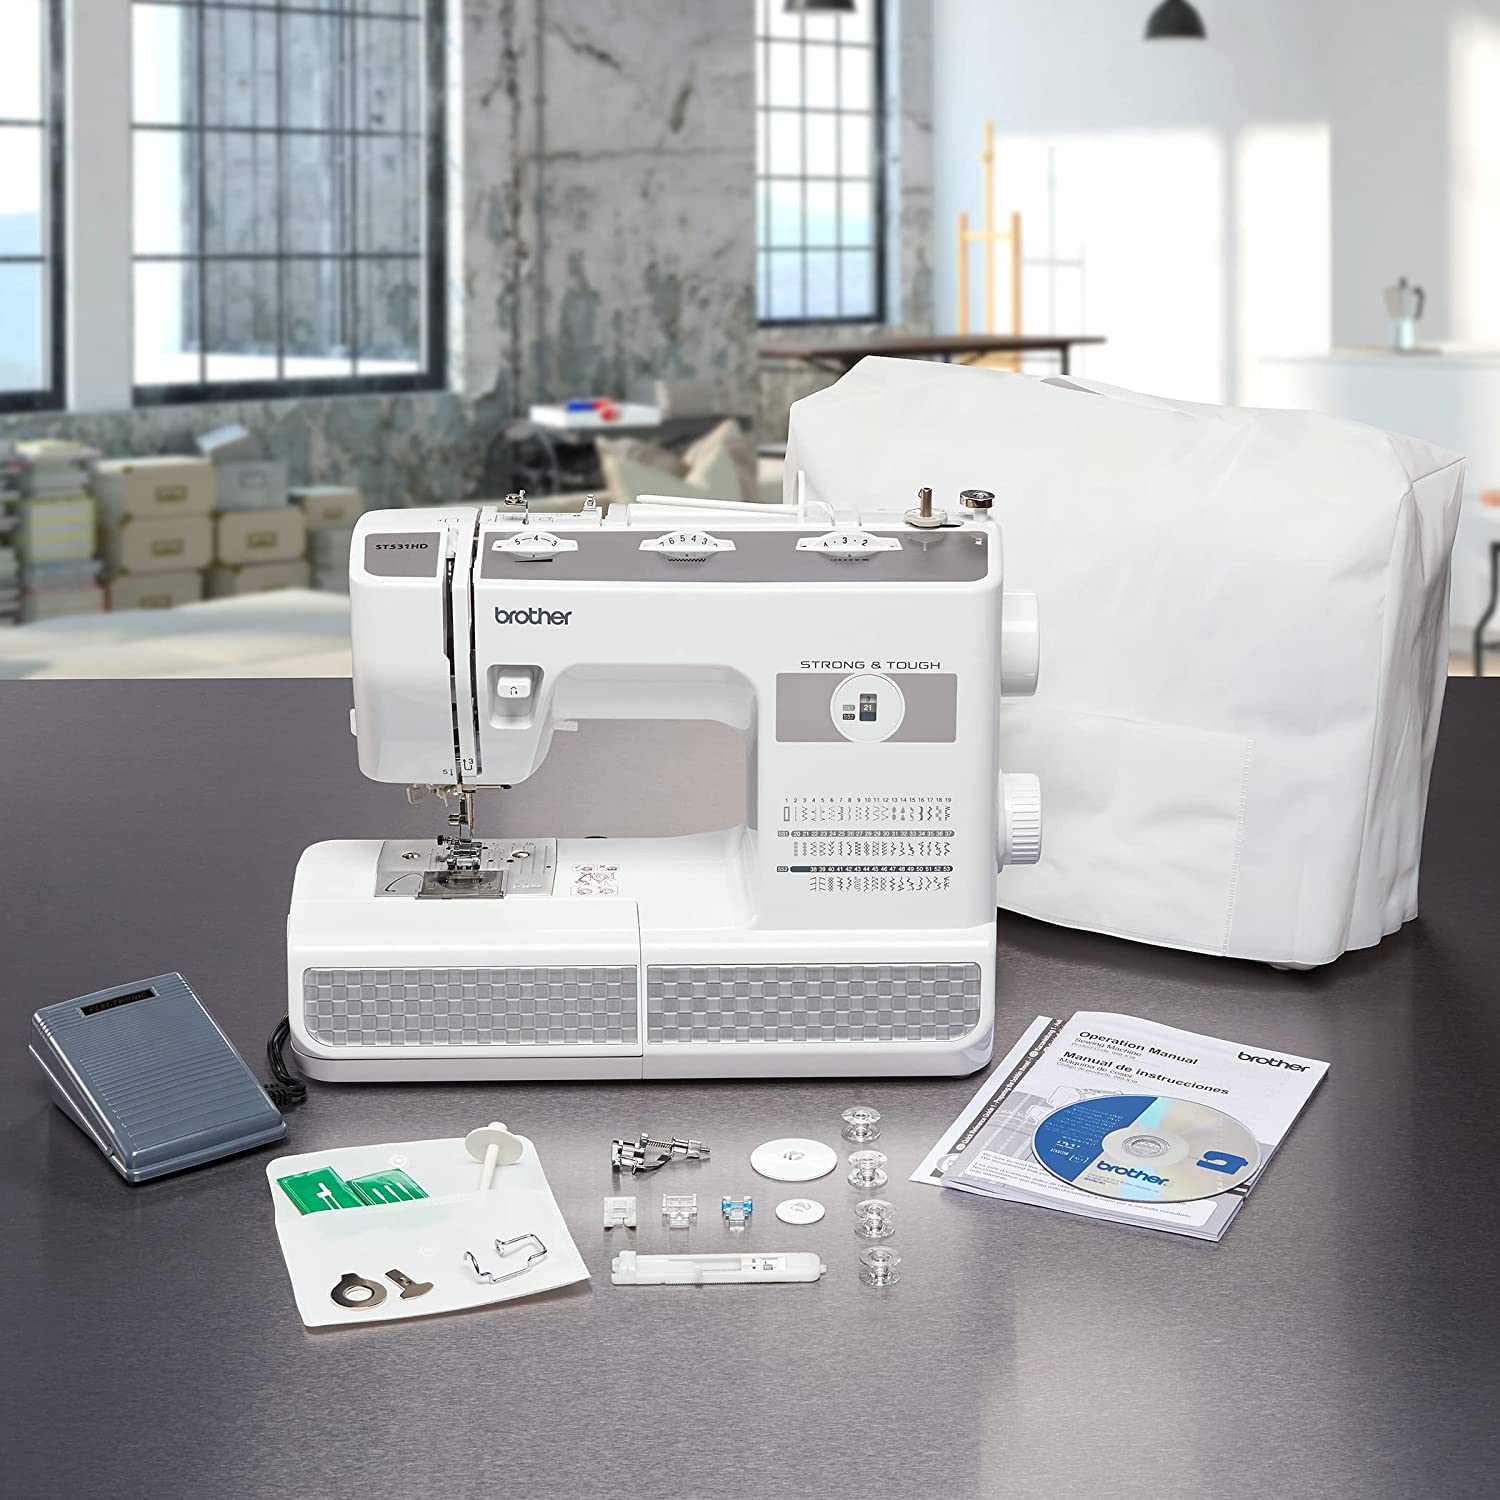 image of the Brother ST531HD Sewing Machine and included accessories on a table